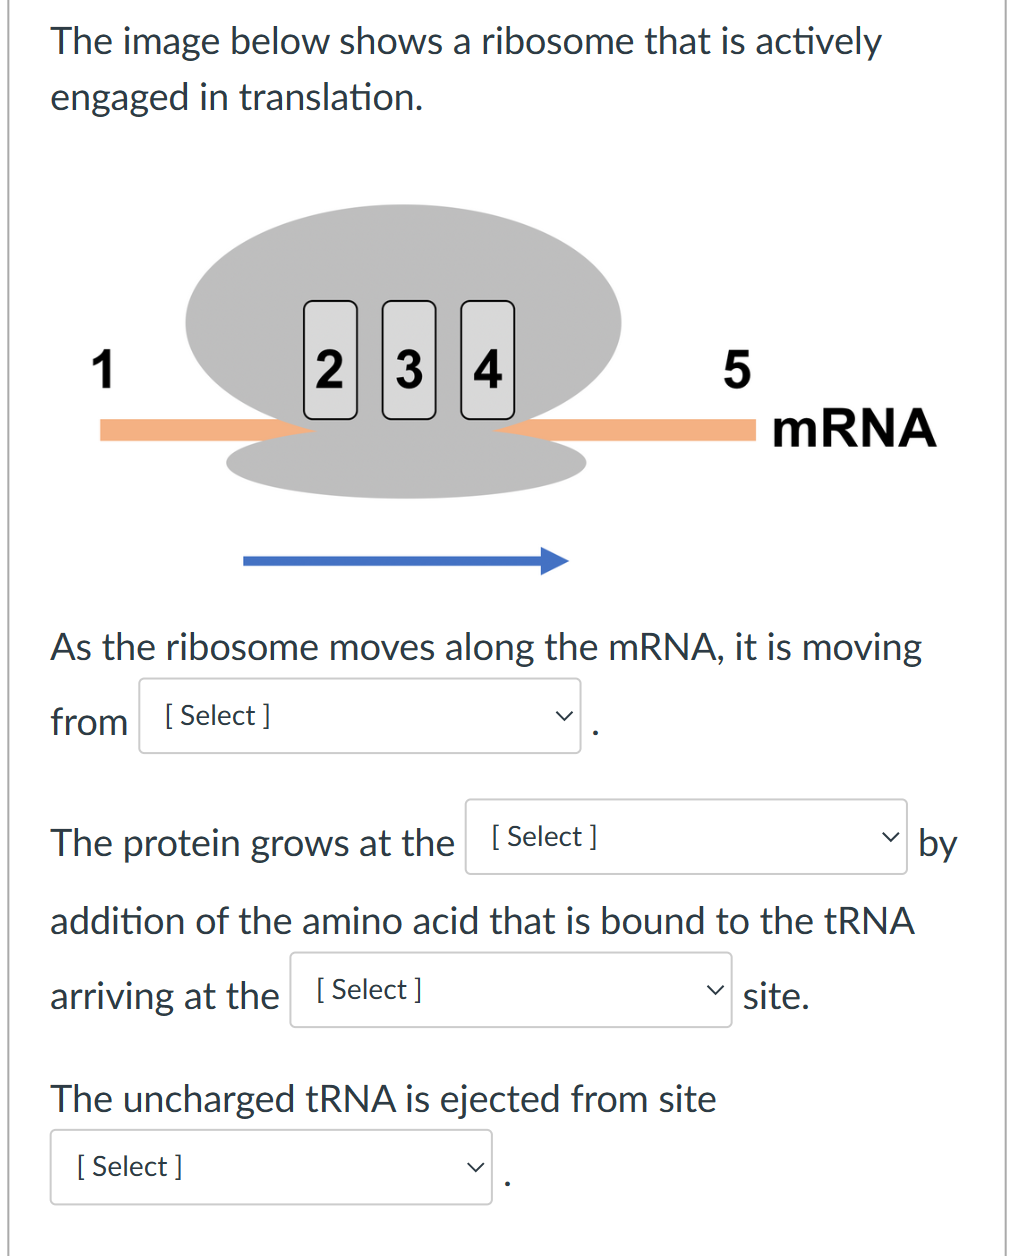 The image below shows a ribosome that is actively
engaged in translation.
1
2 3 4
5
As the ribosome moves along the mRNA, it is moving
from [Select]
The uncharged tRNA is ejected from site
[Select]
mRNA
The protein grows at the [Select ]
addition of the amino acid that is bound to the tRNA
arriving at the [Select]
site.
by